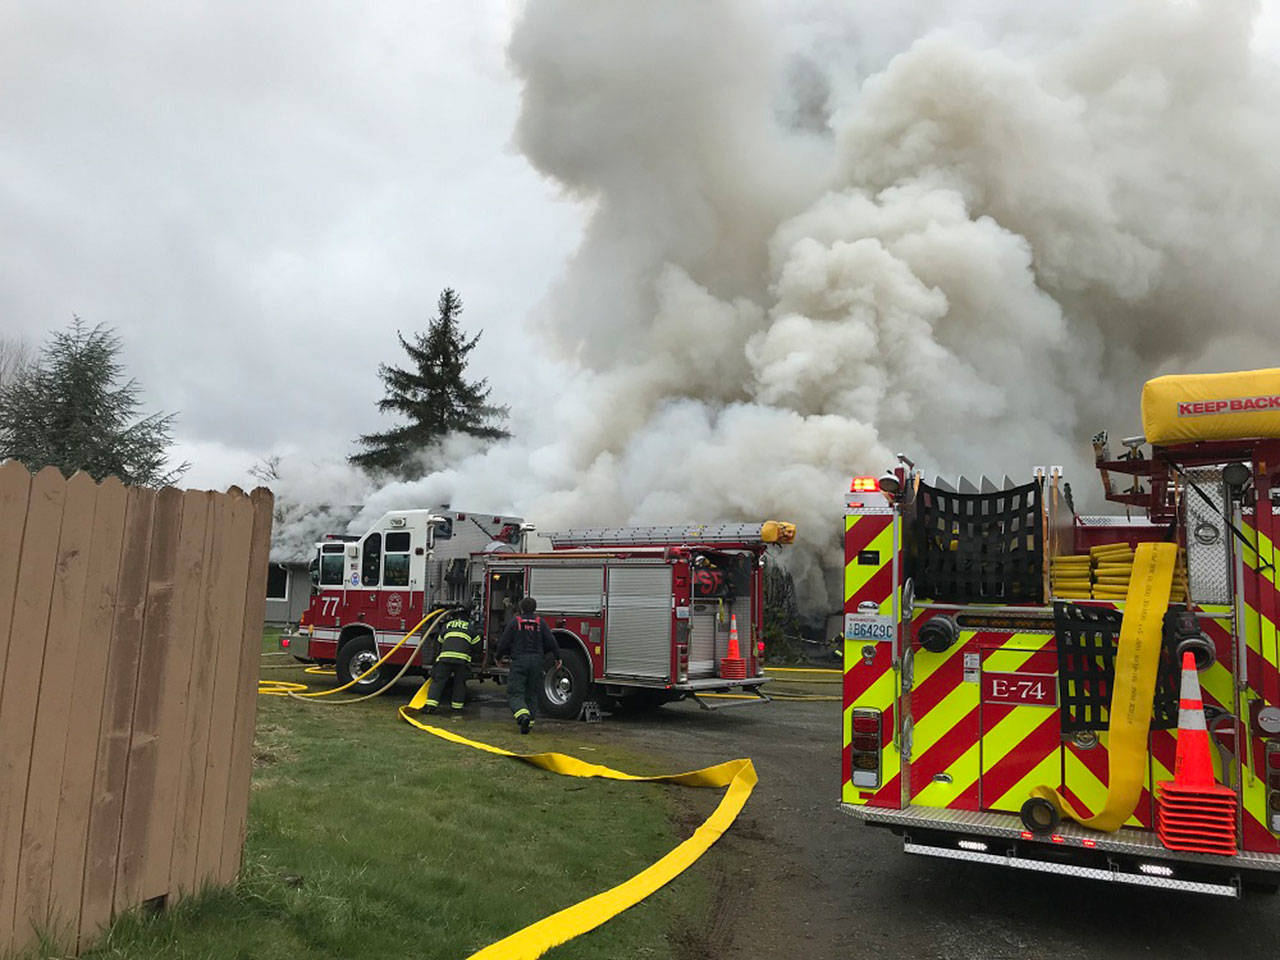 Renton Regional Fire Authority and Puget Sound Regional Fire Authority battled a Kent house fire on March 5. Two people were displaced. (Courtesy photos)